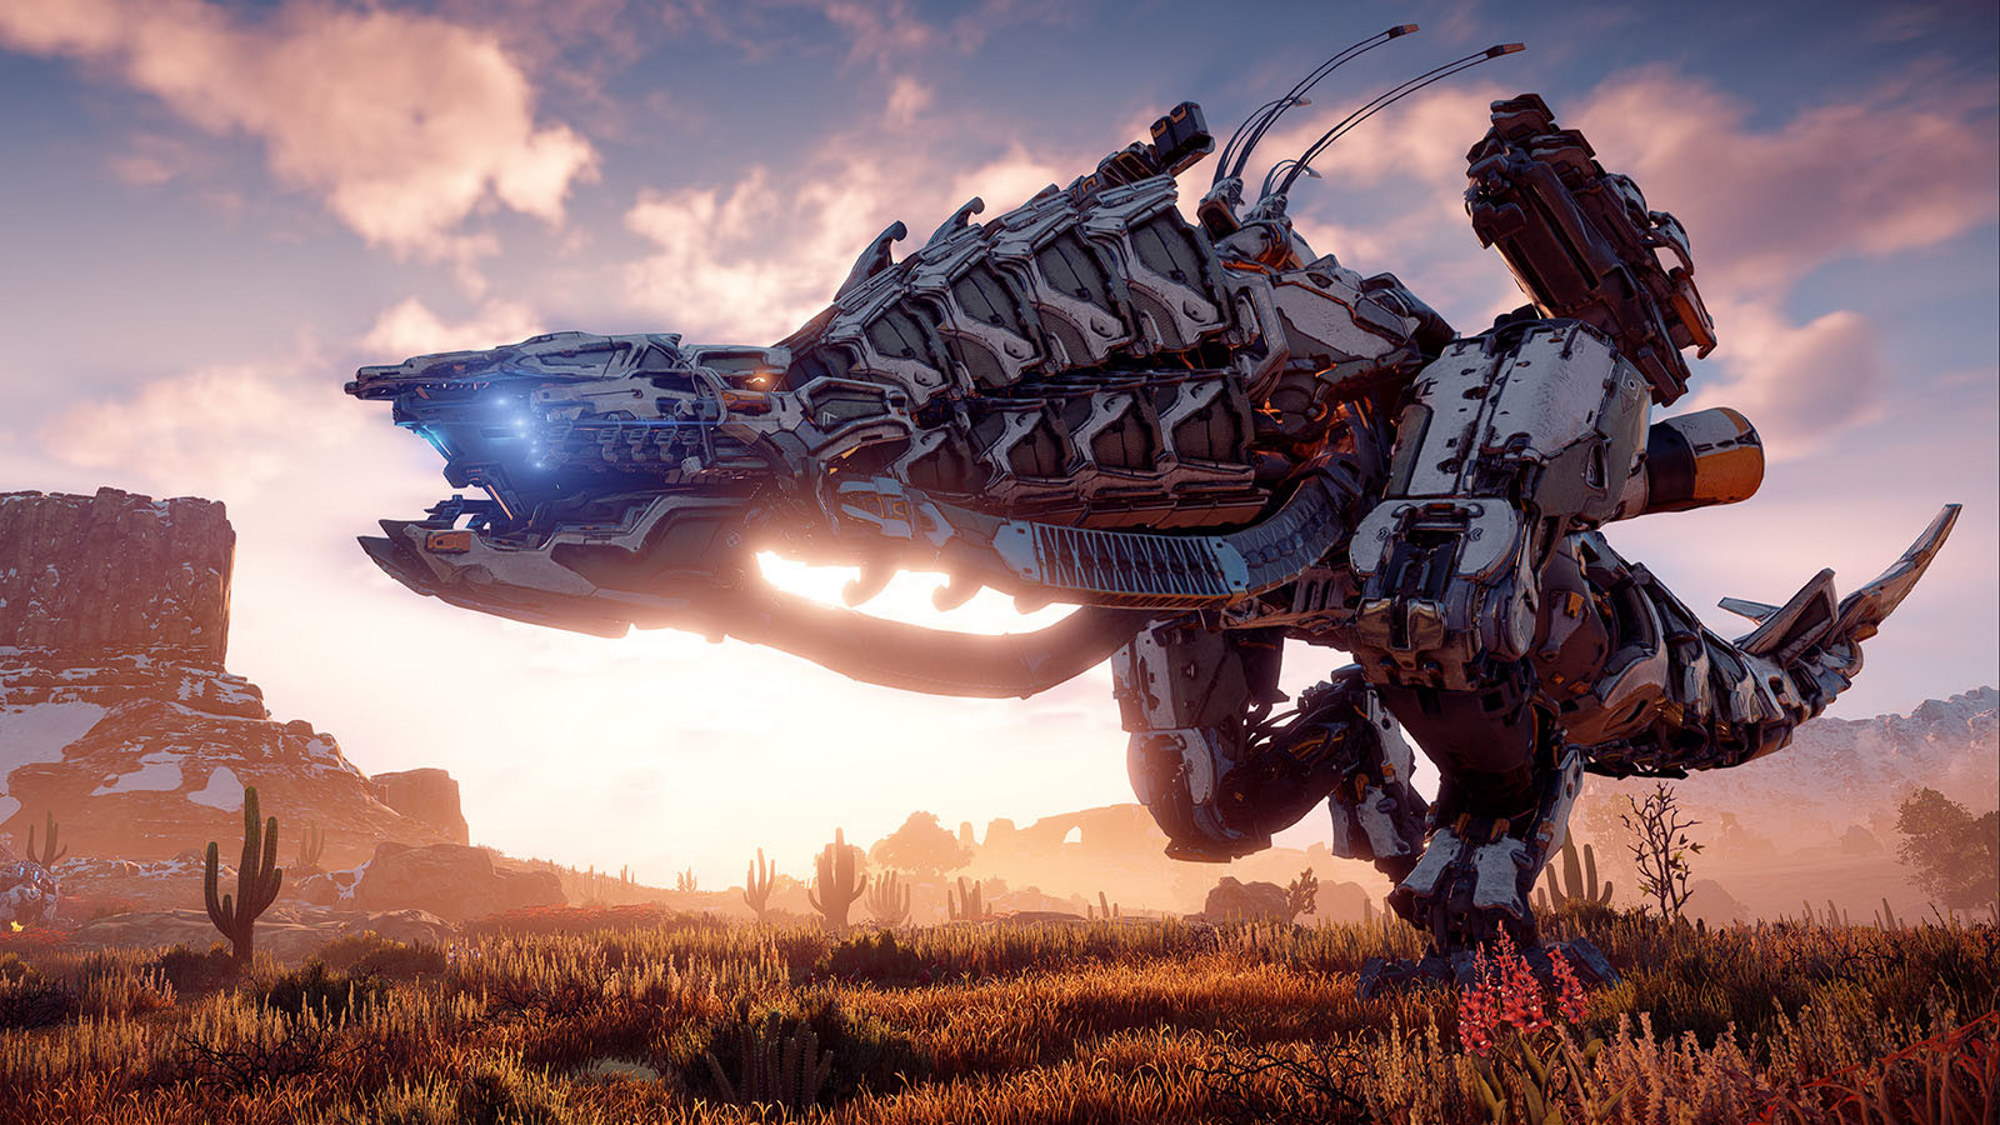 Horizon Zero Dawn S Rich Storytelling And Robot Dinosaurs Make For An Experience Like None Other Rog Republic Of Gamers Suisse